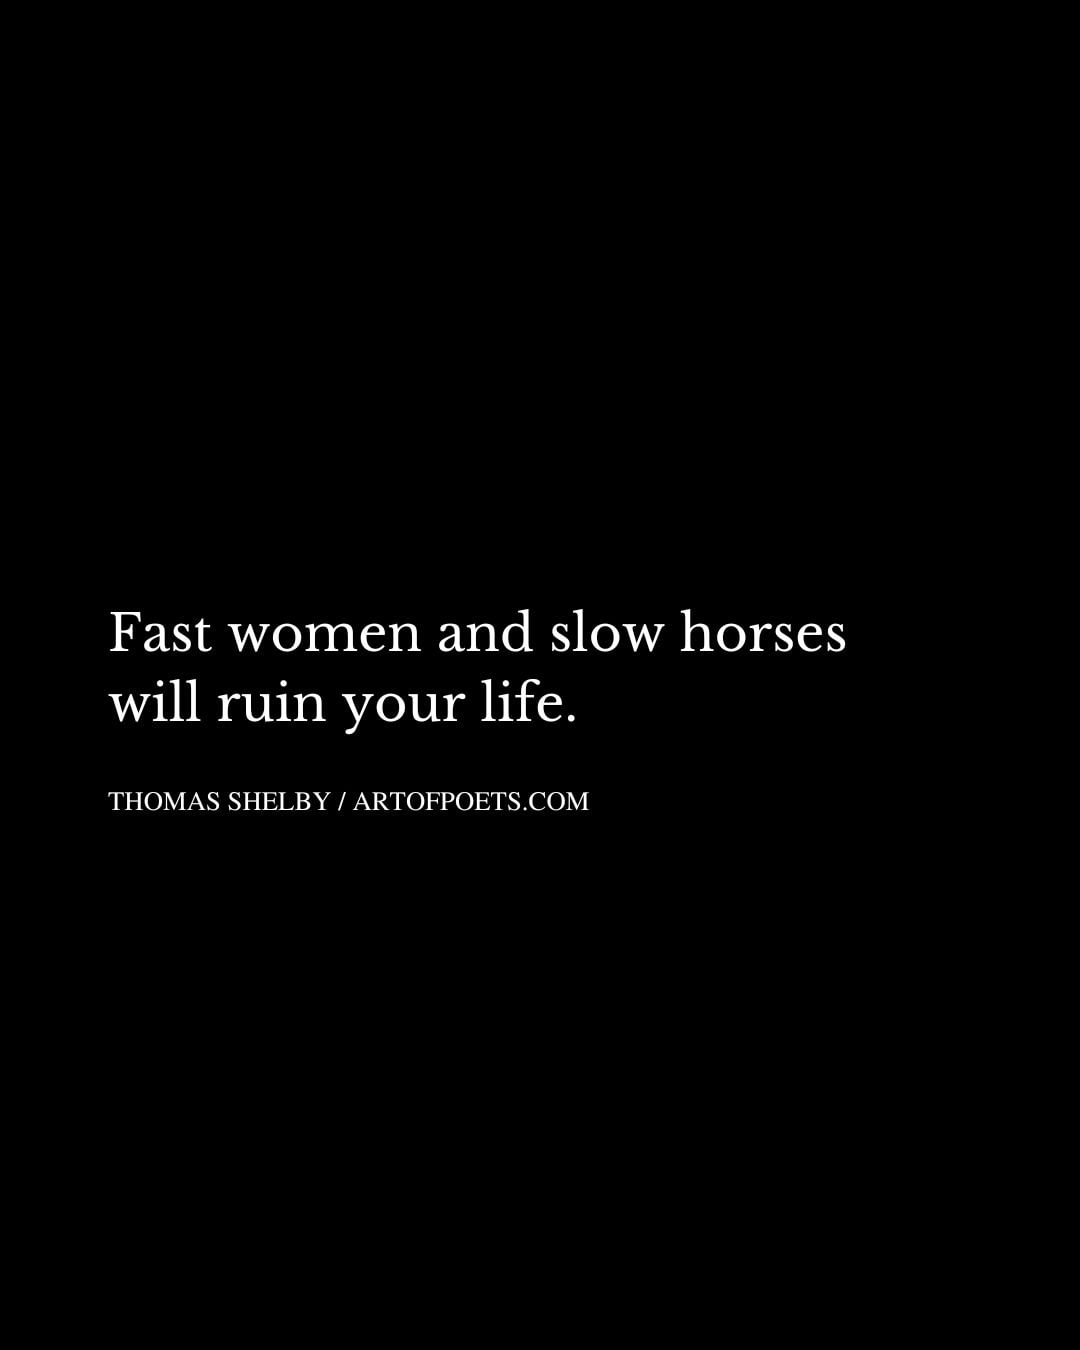 Fast women and slow horses will ruin your life